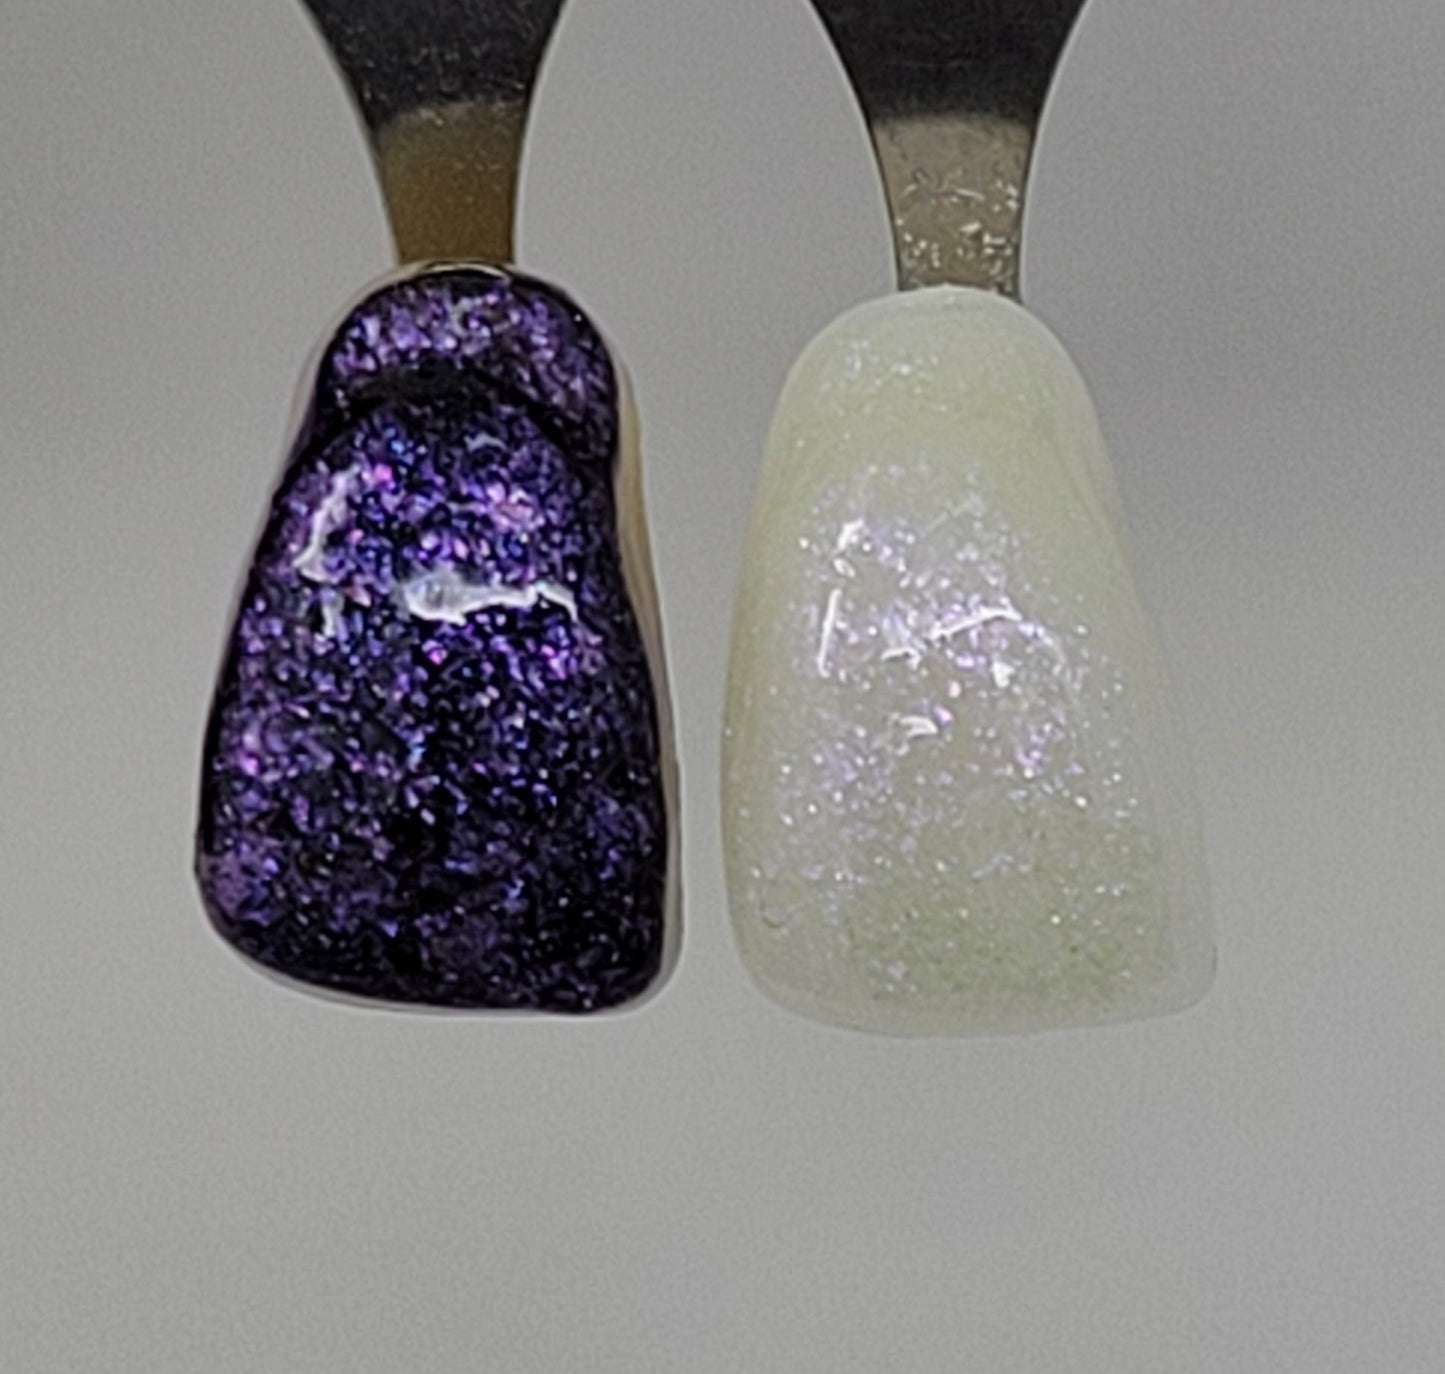 Purple Opal Temporary Tattooth Colorant on a demo tooth.  These colorants can be applied to teeth to temporarily alter their color or iridescence.